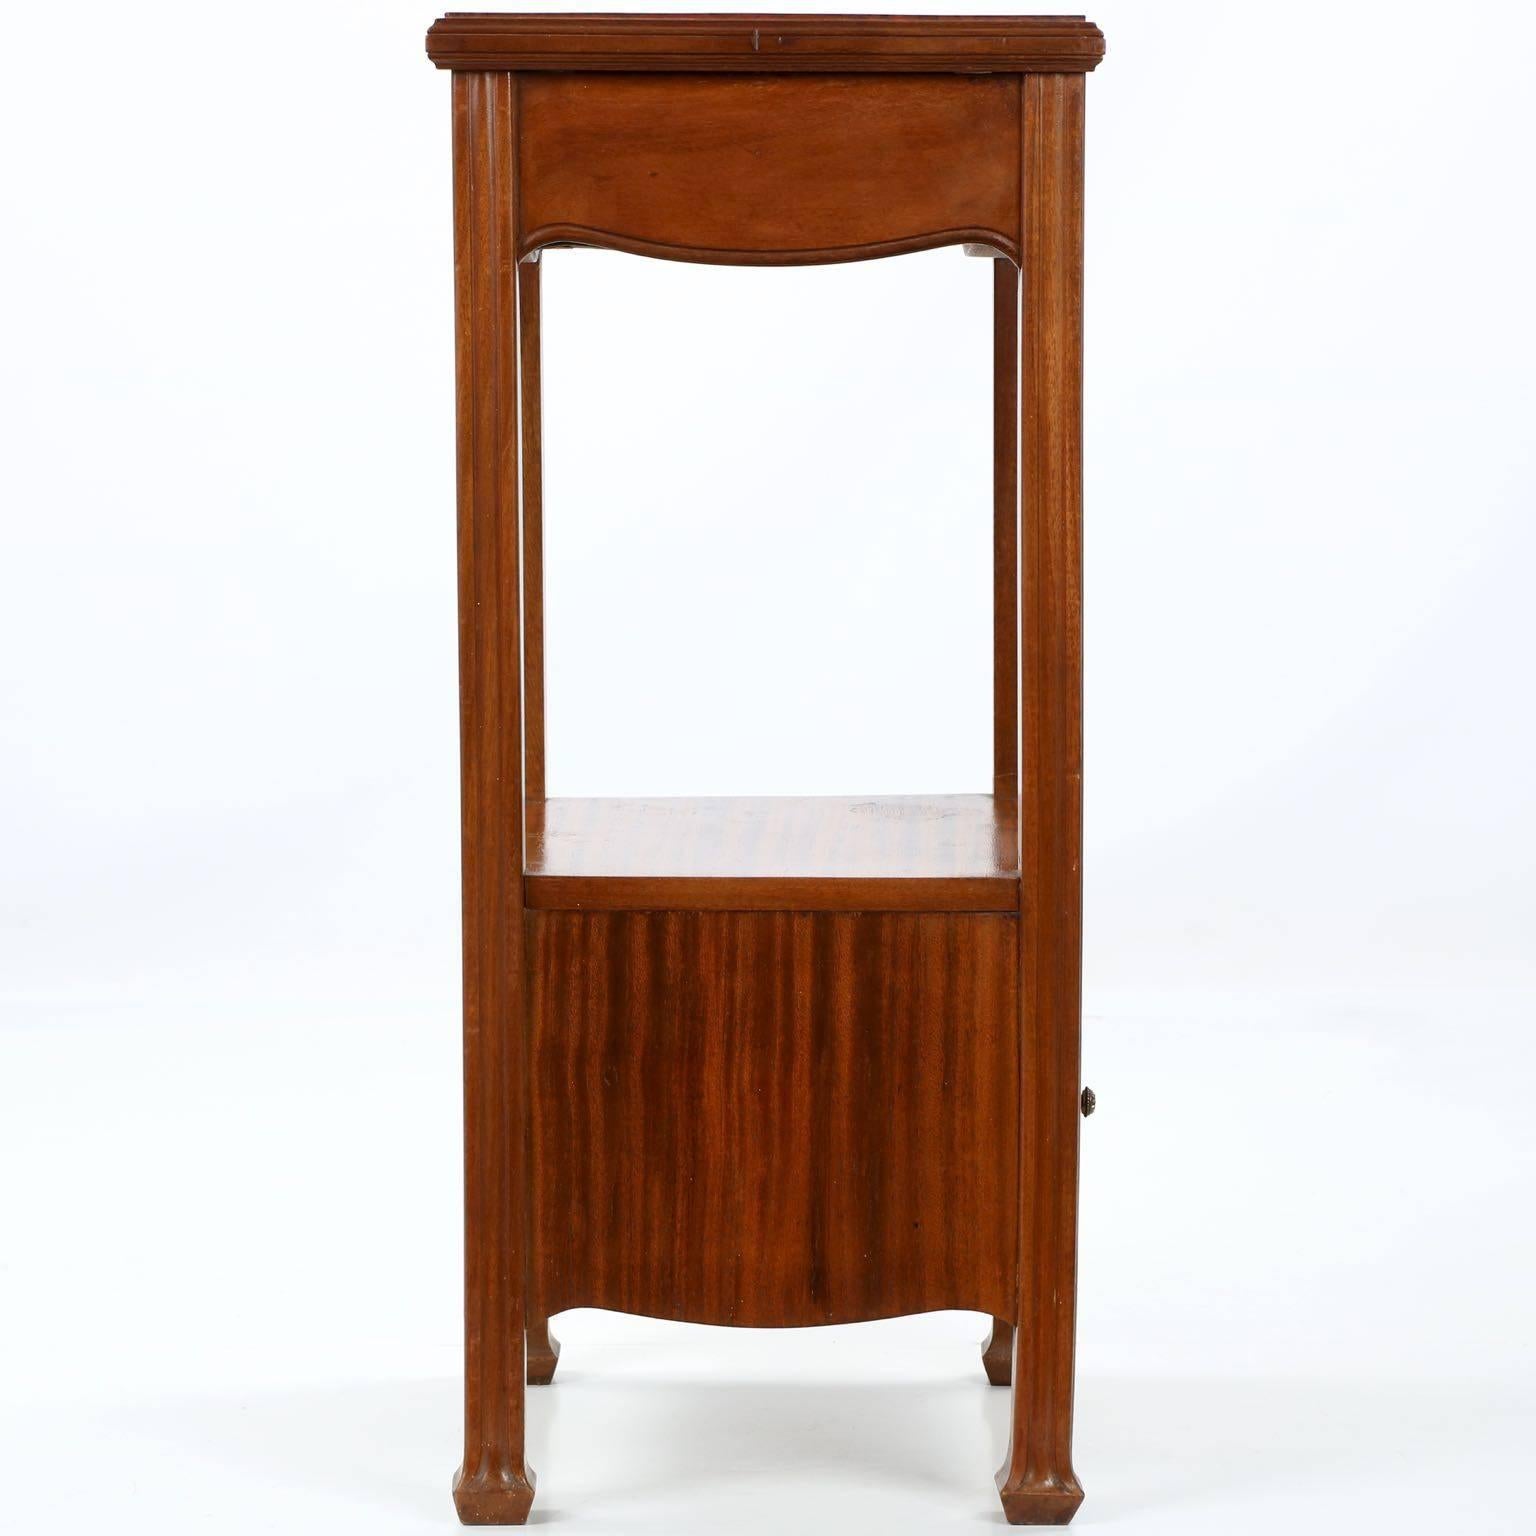 A beautiful little side table from the Art Nouveau period, crafted of solid mahogany and mahogany veneers over oak secondary woods. The original rouge marble top is set in a molded rim over a single drawer with gorgeous burled walnut veneer flanked